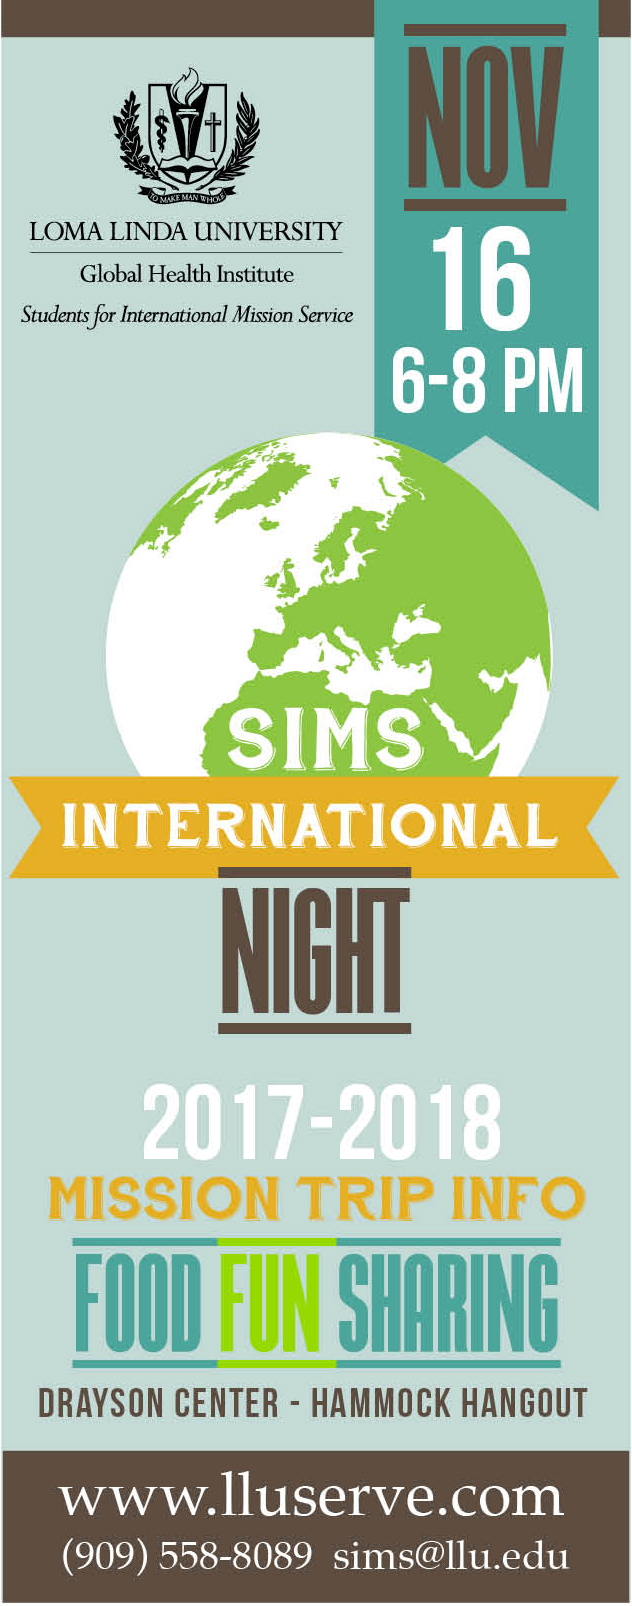 Ad for SIMS International Night